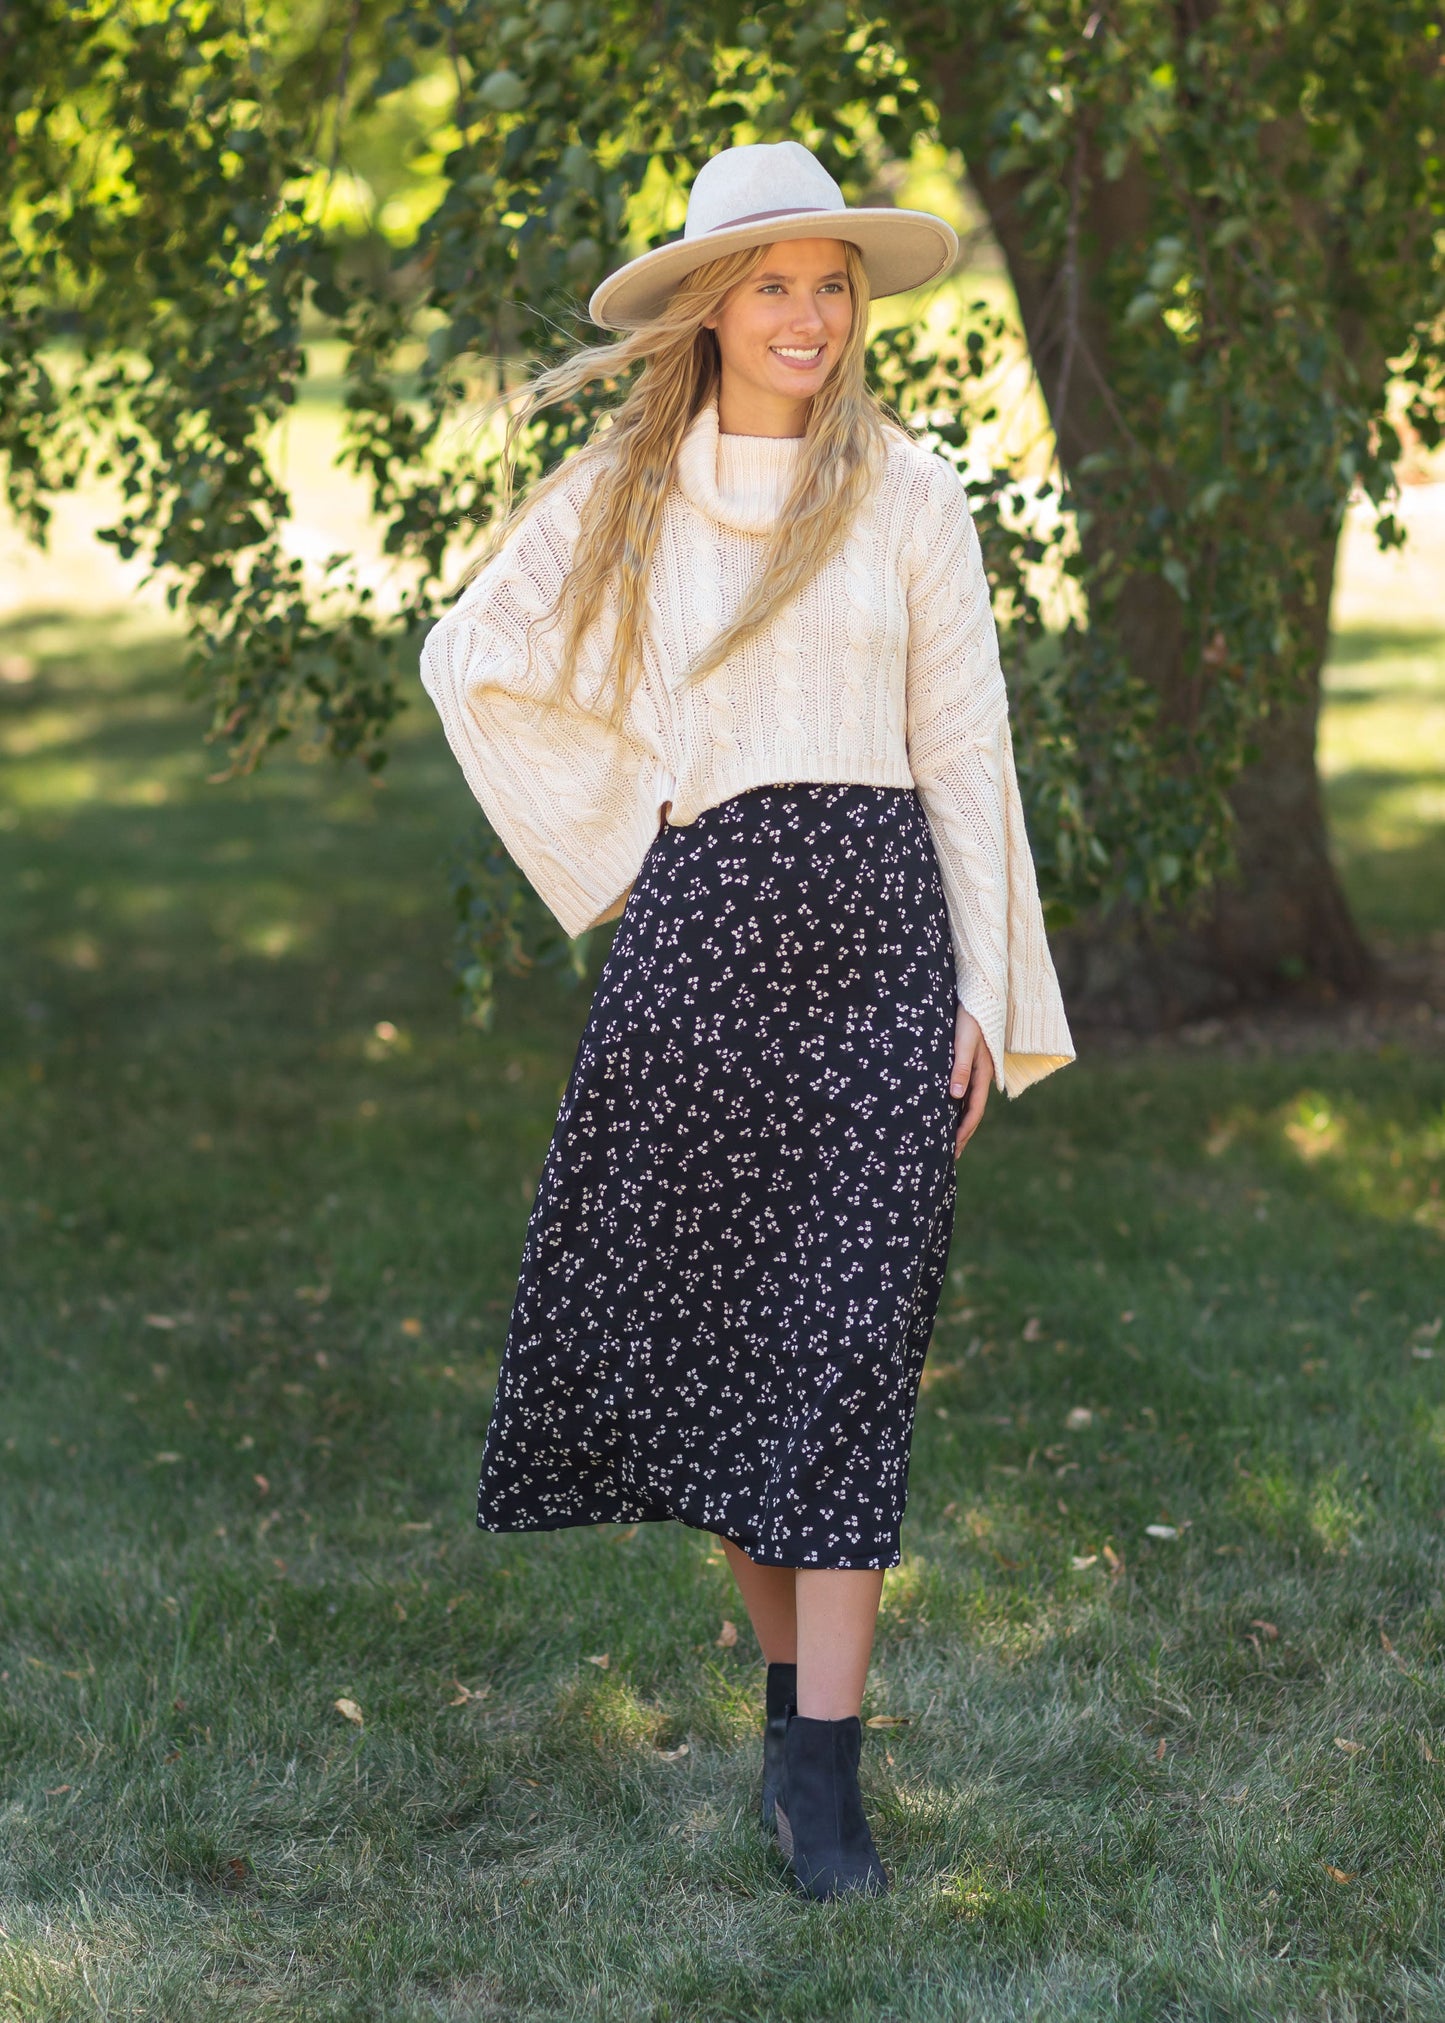 The Braylyn is an Inherit Design that is an a-line midi skirt that is black with white florals with a stretch waist and is so cute.